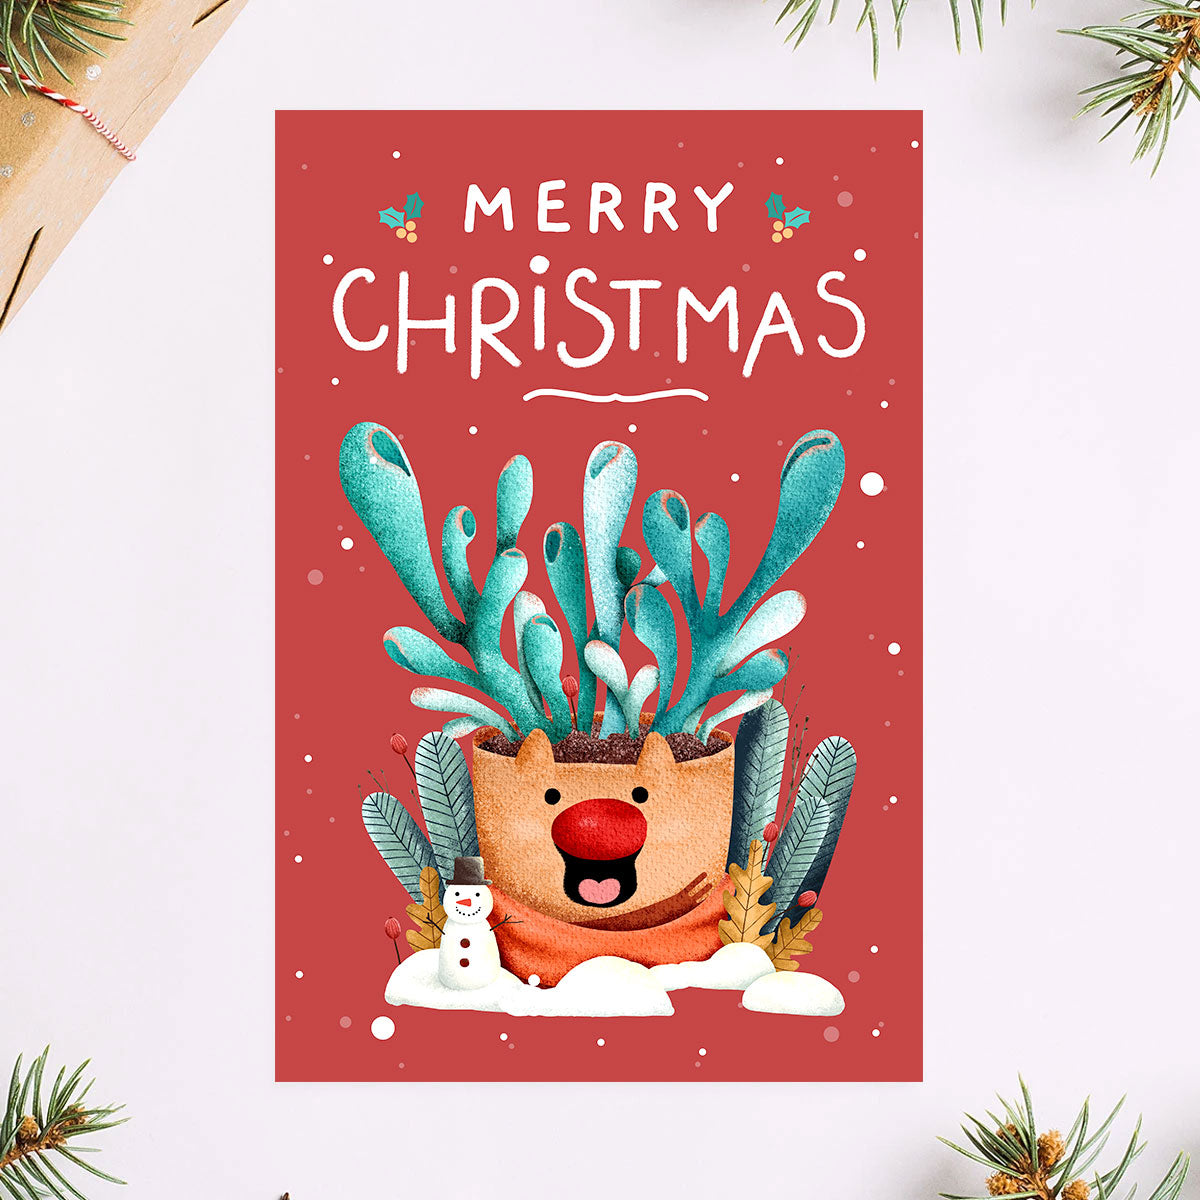 Merry Christmas Card for sale, Succulent Merry Christmas Card for sale, Cactus Greeting Card, Succulents Greeting Card, Succulents Gift Ideas, Merry Christmas Cactus Card, Merry Christmas Succulents Card